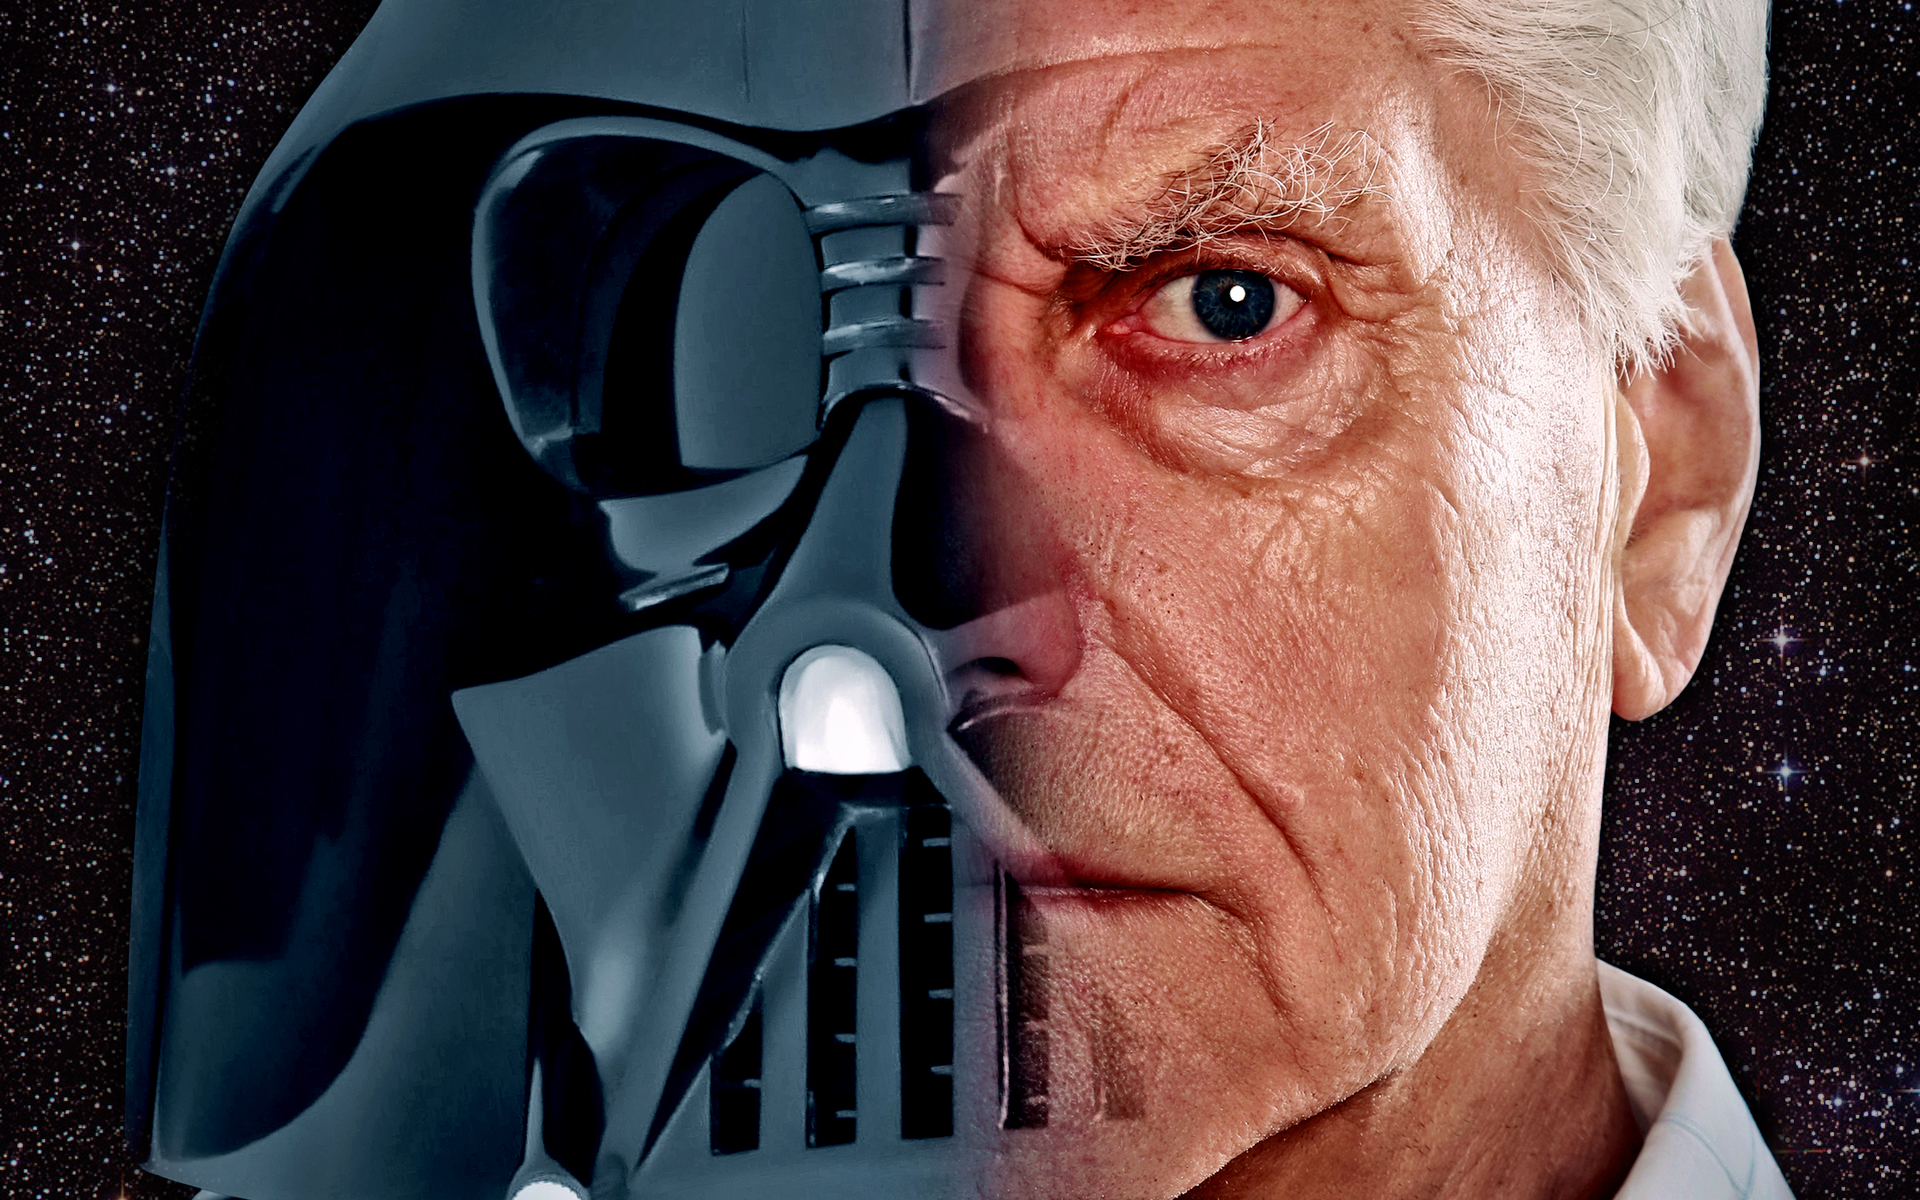 darth vader actor without mask